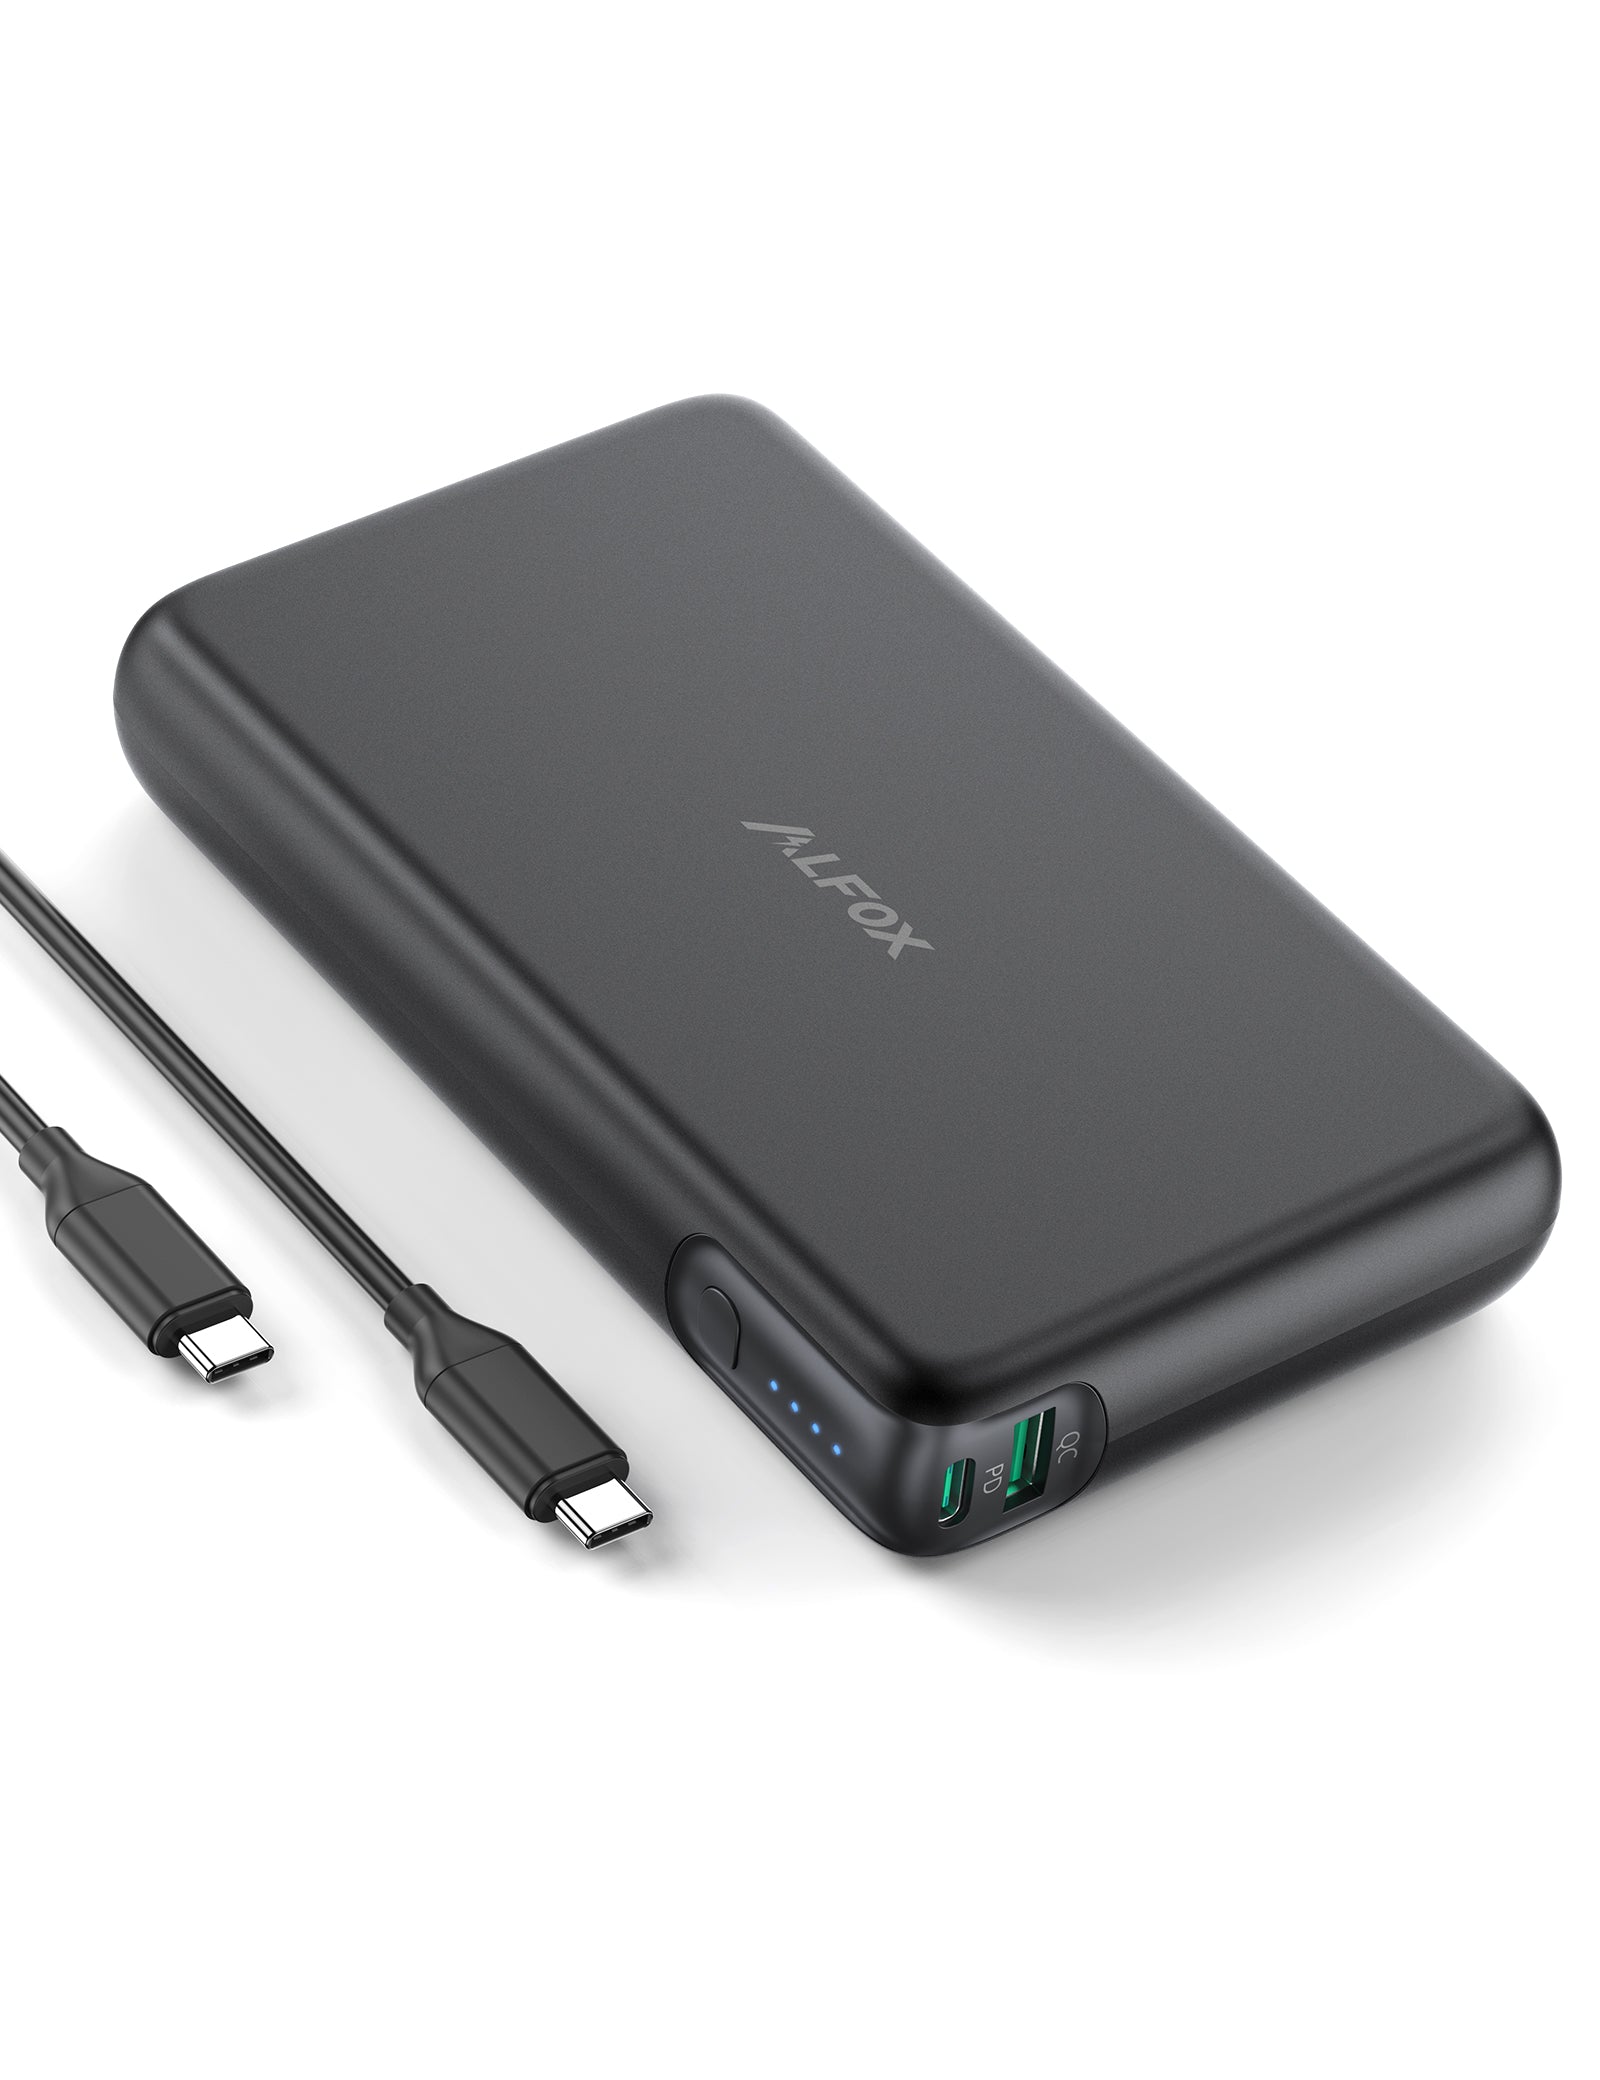 Laptop Power Bank 65W USB C 30000mAh with Flashlight, Portable Laptop  Charger Super Fast Charging 4-Port PD3.0 External Battery Pack for iPhone  13/12